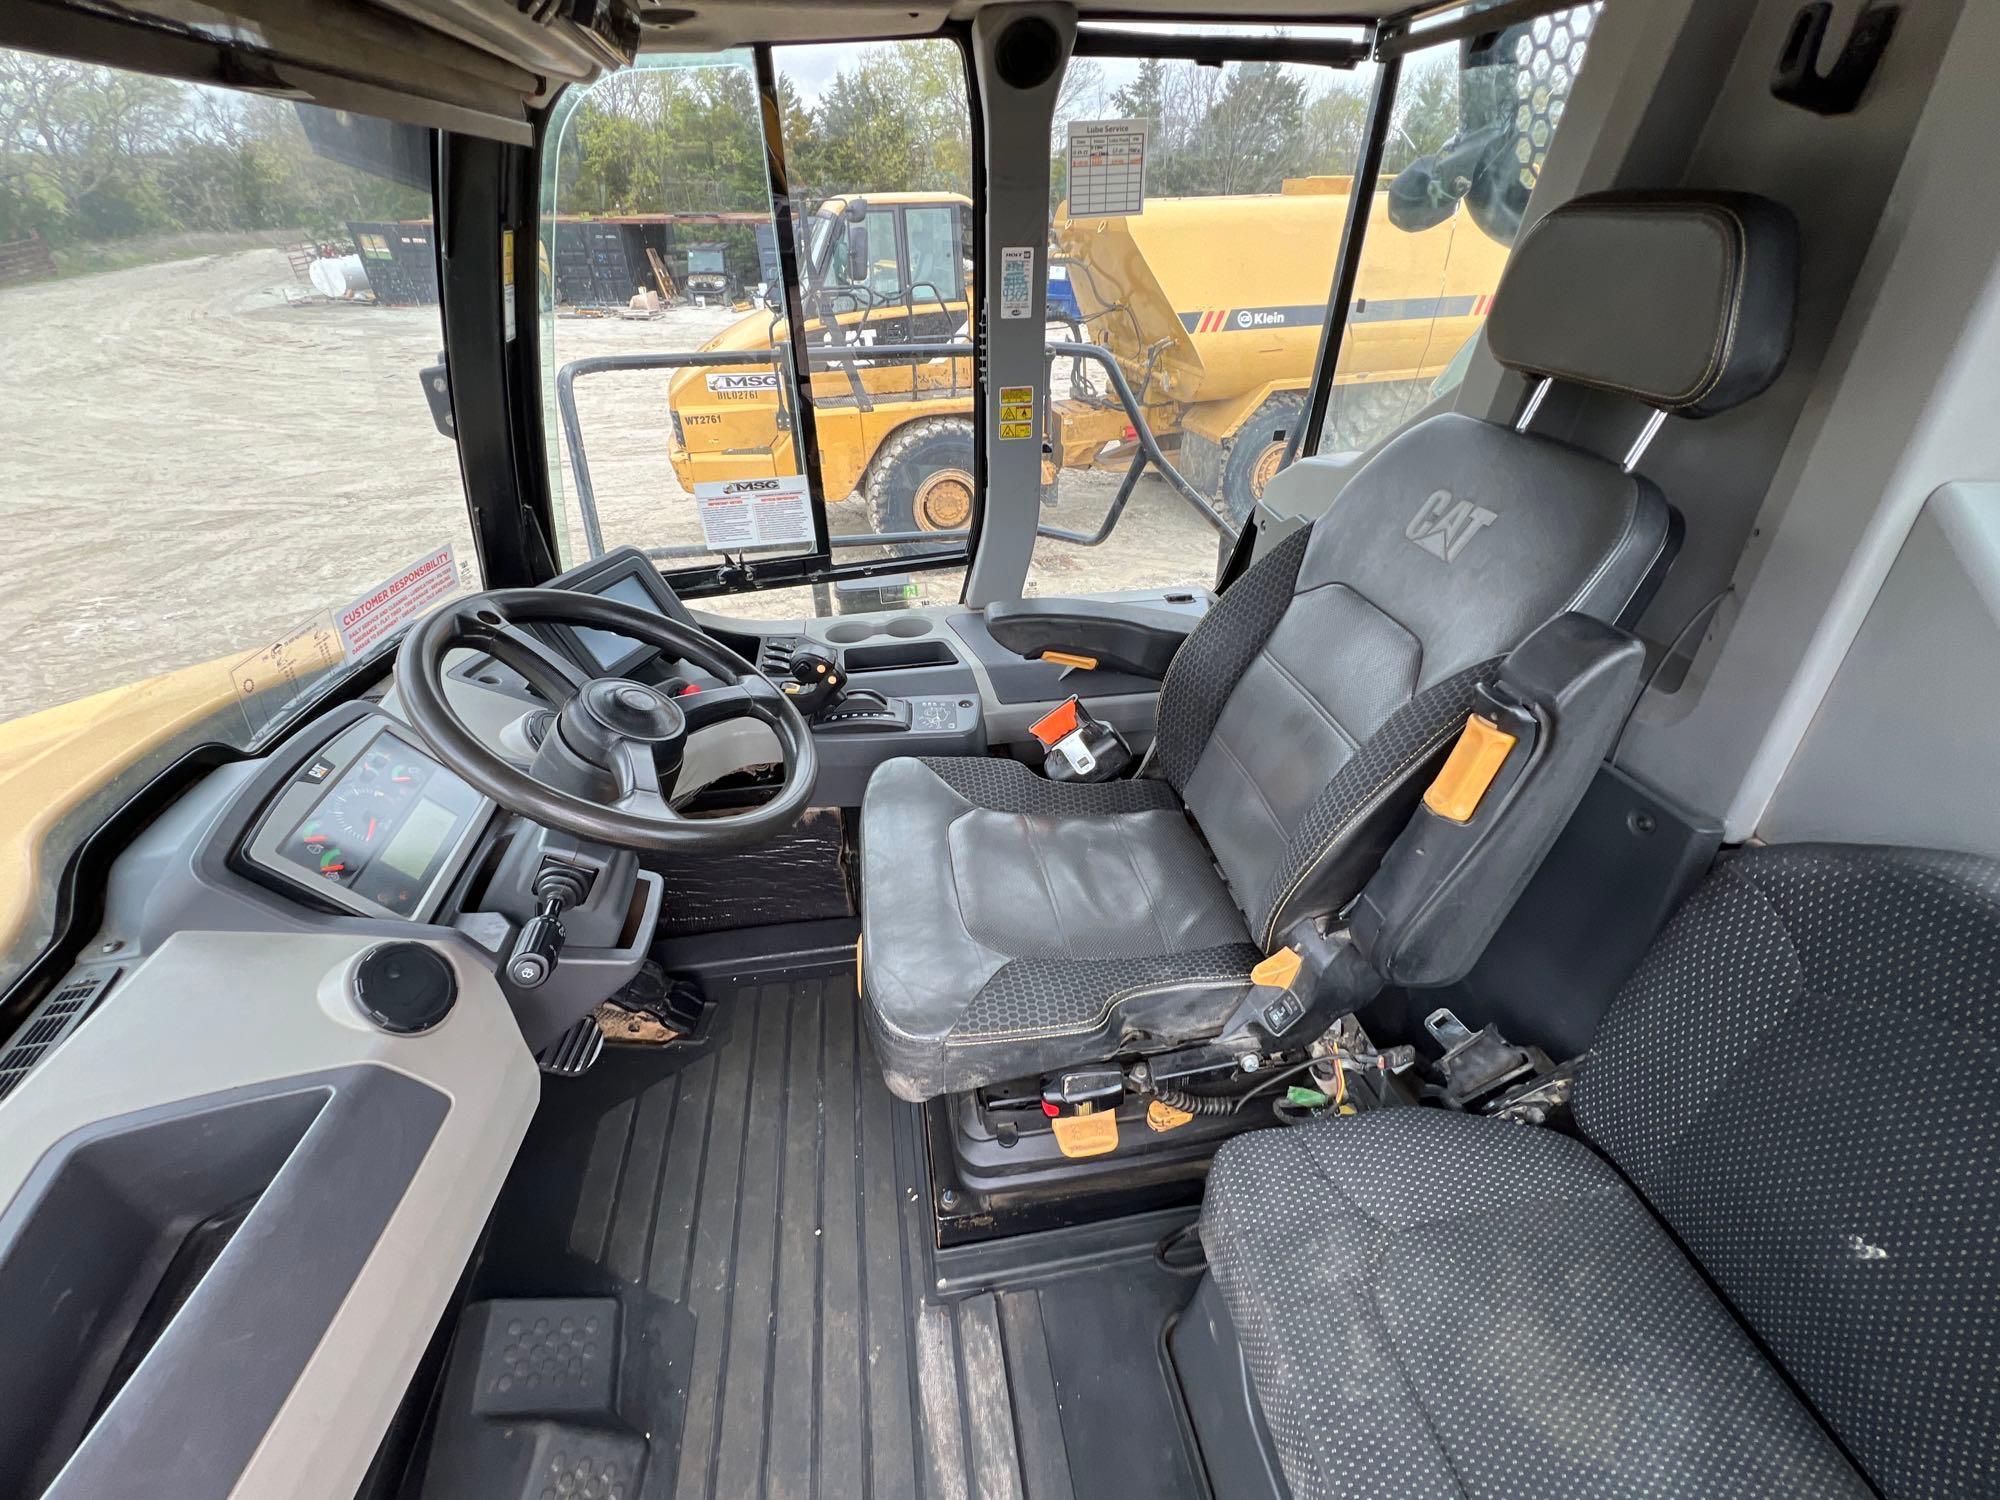 2019 CAT 745 ARTICULATED HAUL TRUCK SN:CAT00745A3T601514 6x6, powered by Cat C18 diesel engIne,